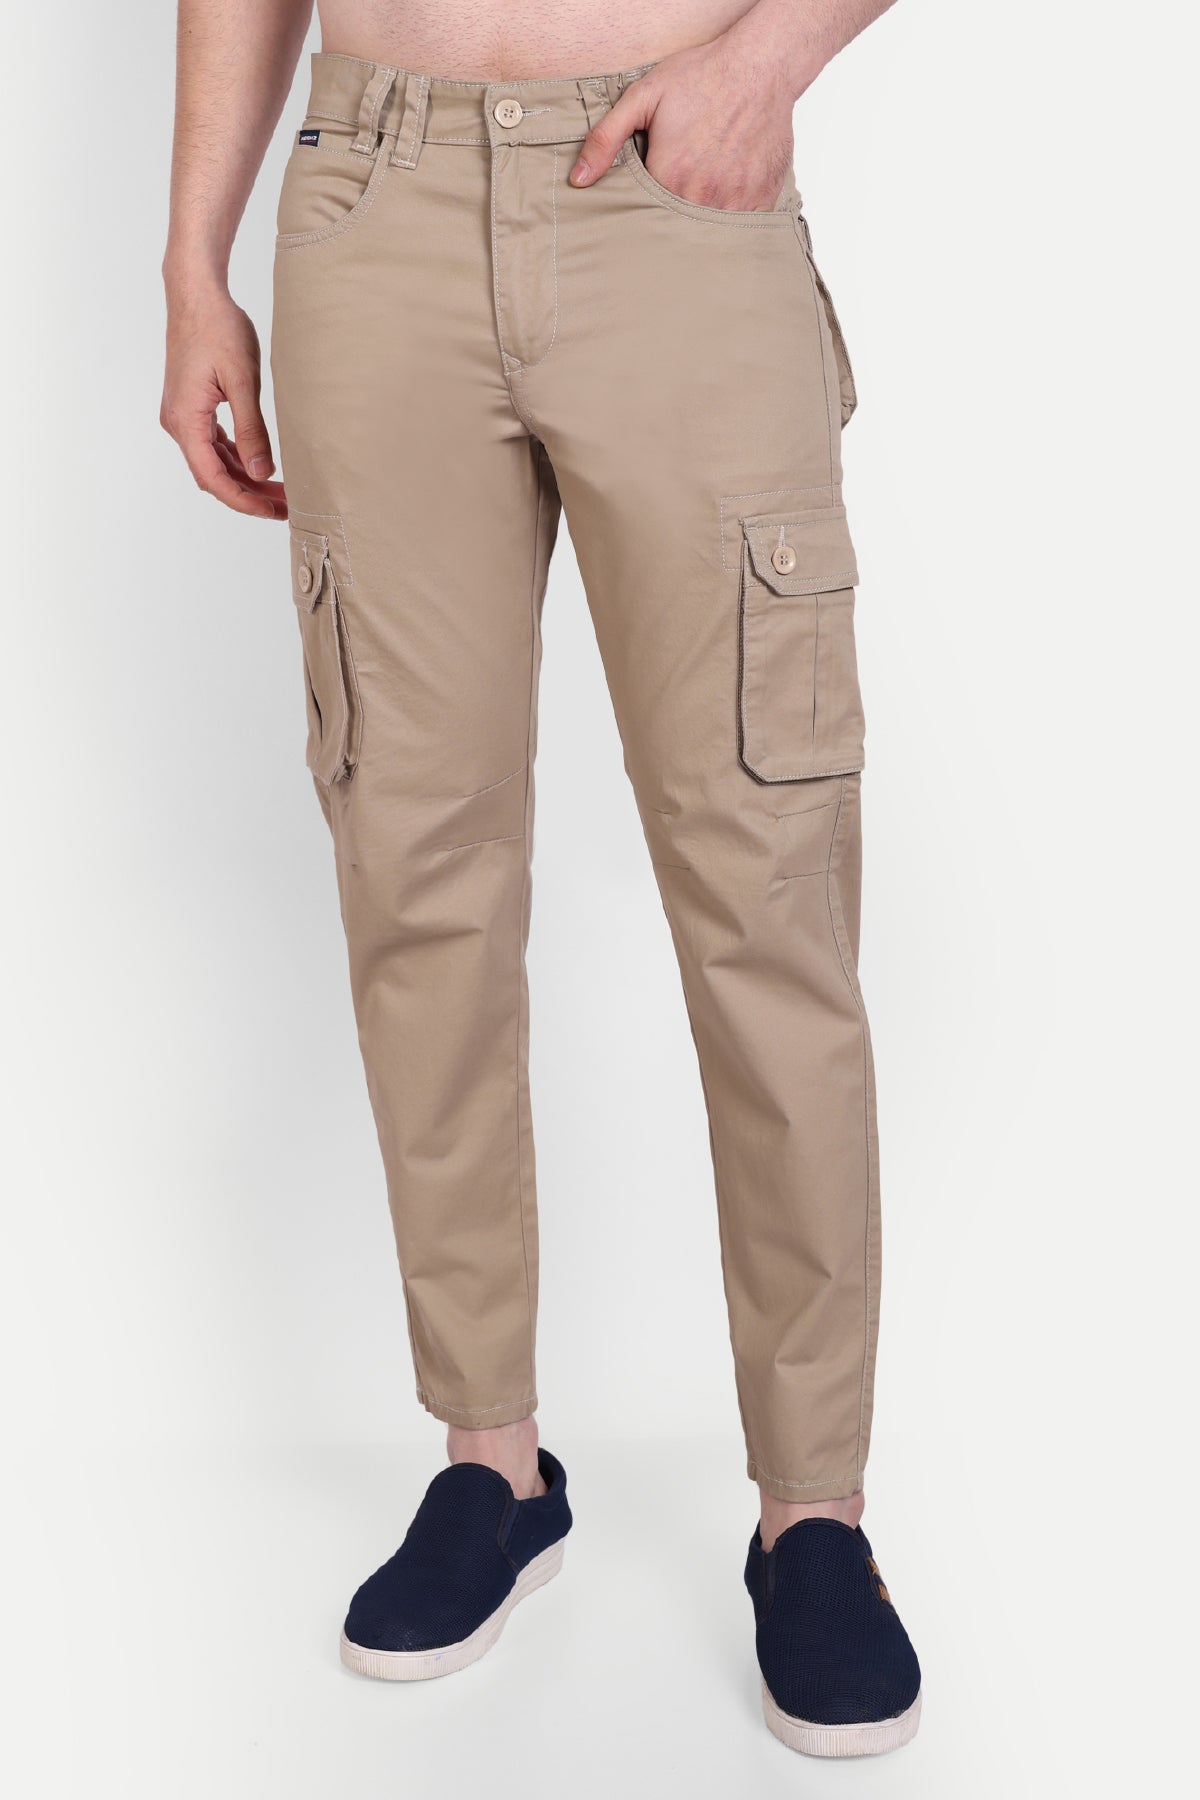 Polo Ralph Lauren Stretch Slim Fit Twill Cargo Pants | Bloomingdale's